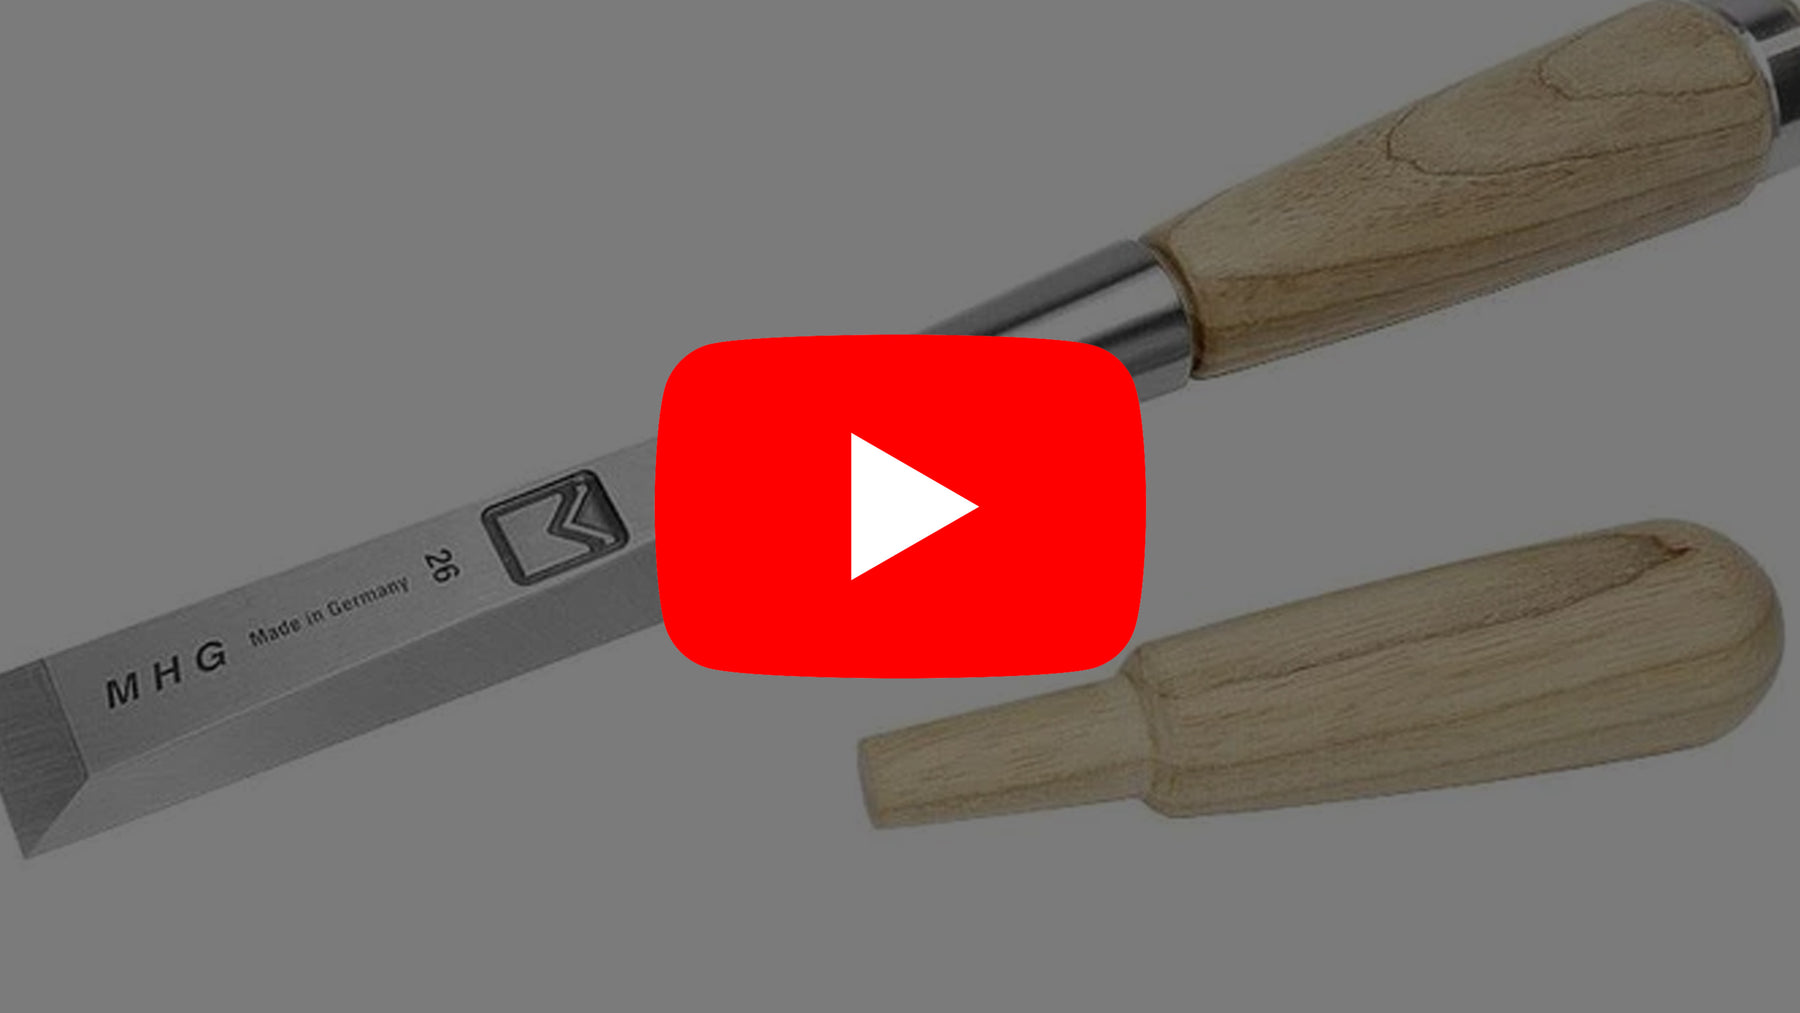 New YouTube Video - MHG Socket Chisel Overview - TF Tools Ltd